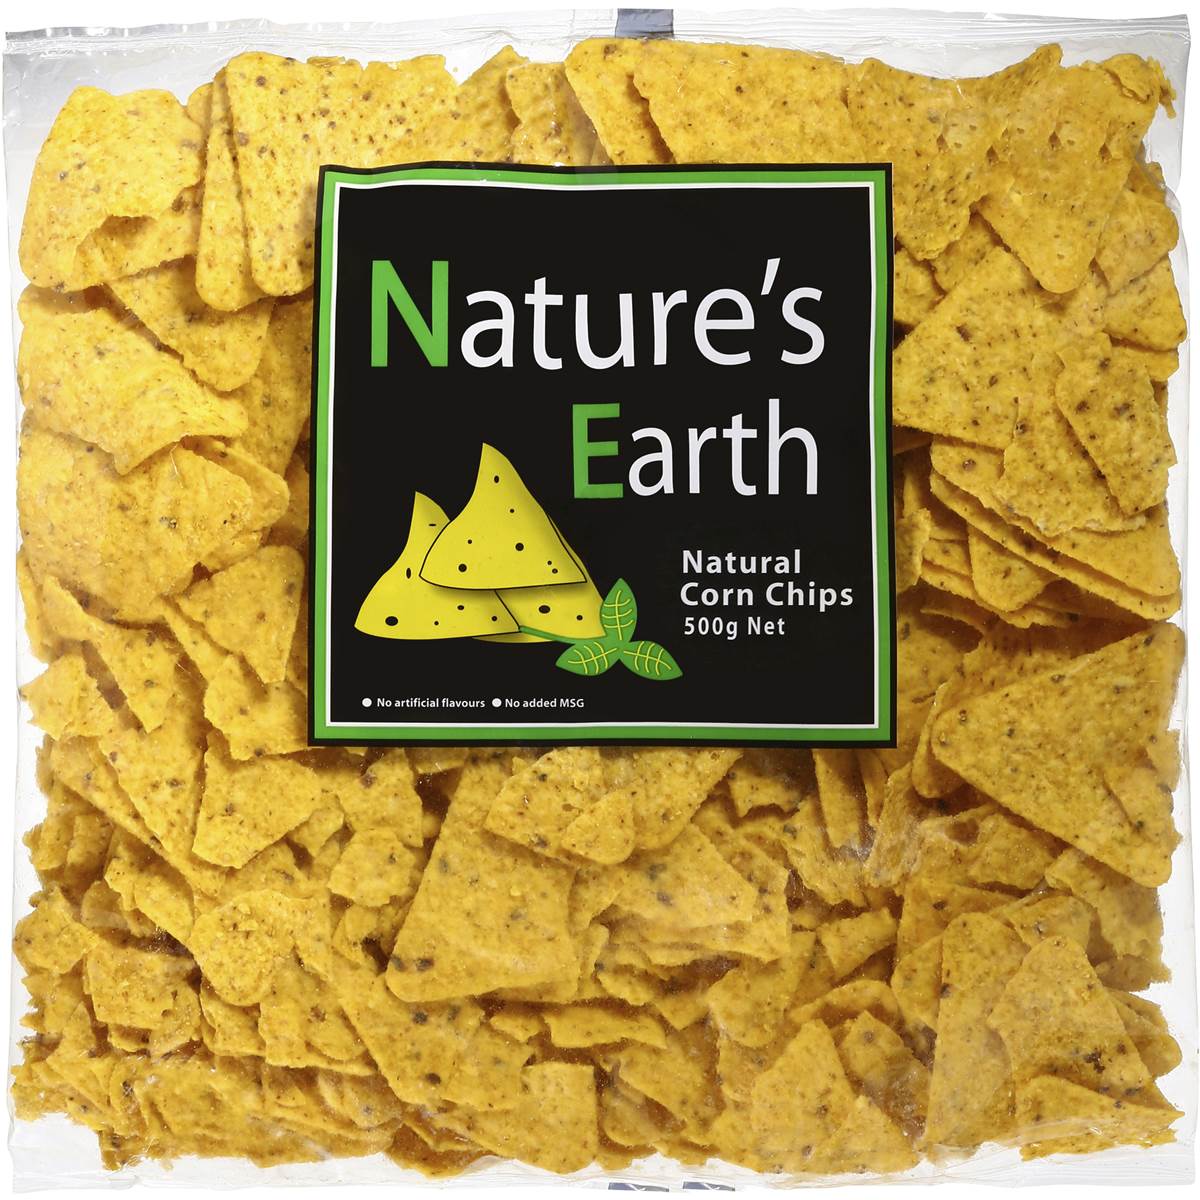 Calories in Nature's Earth Corn Chips Unsalted